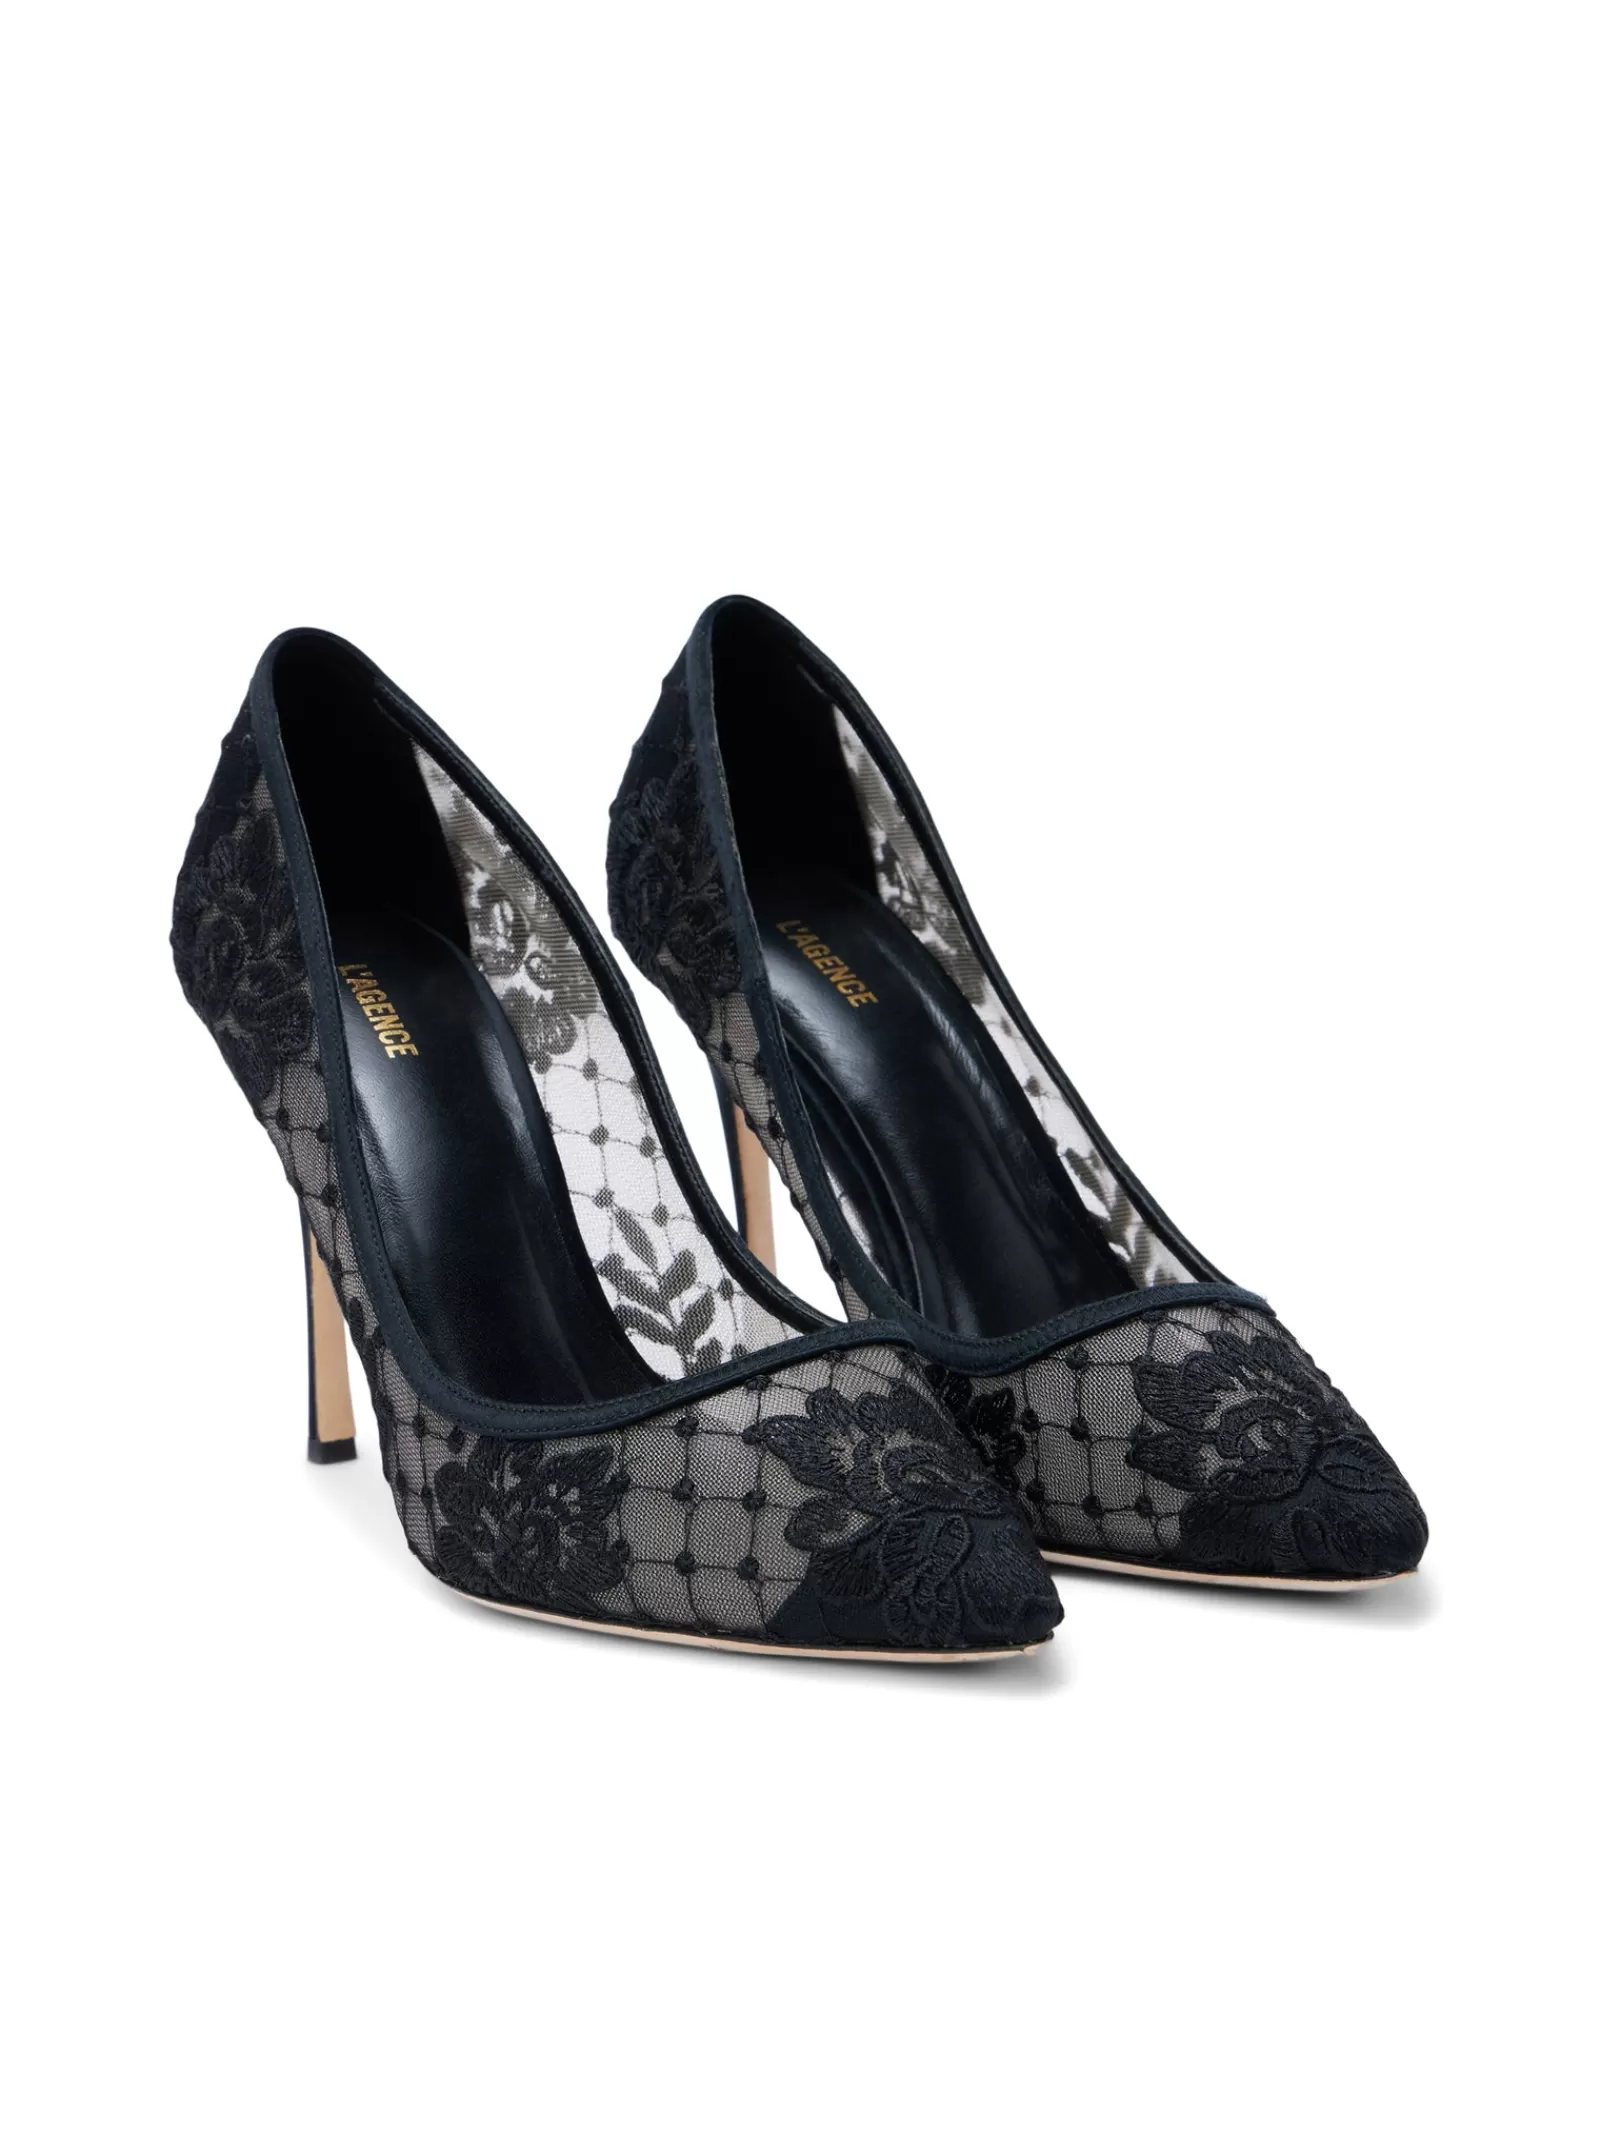 L'AGENCE Anais Lace Pump< Resort Collection | All Things Black